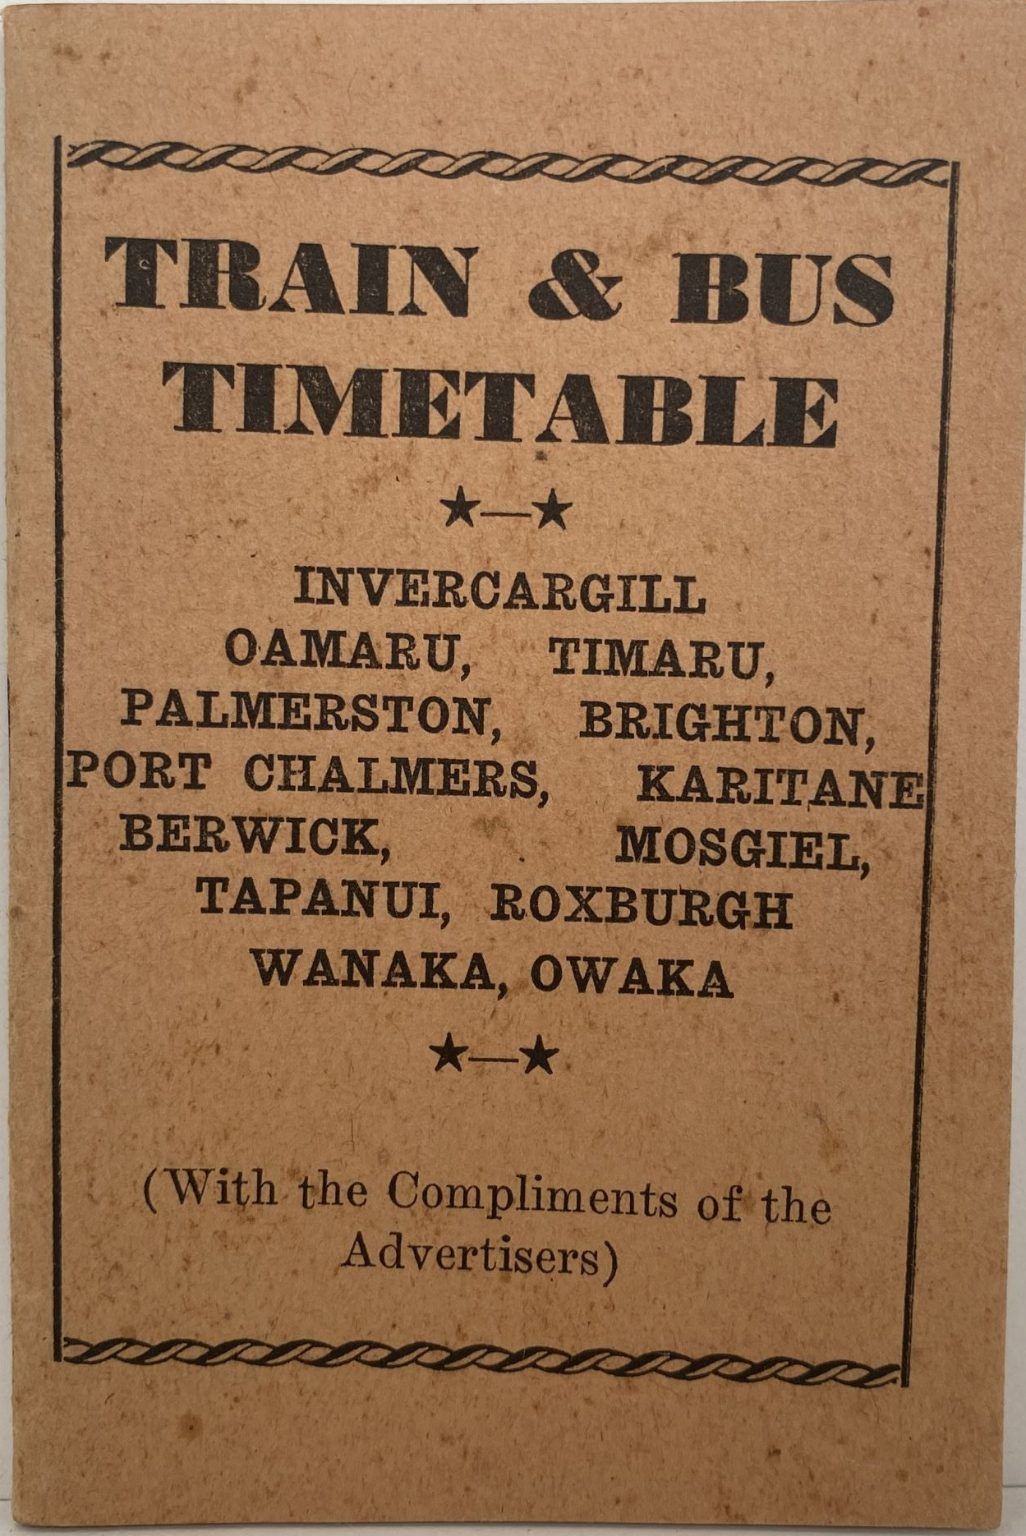 TRAIN & BUS TIMETABLE: New Zealand Rail Services 1930s